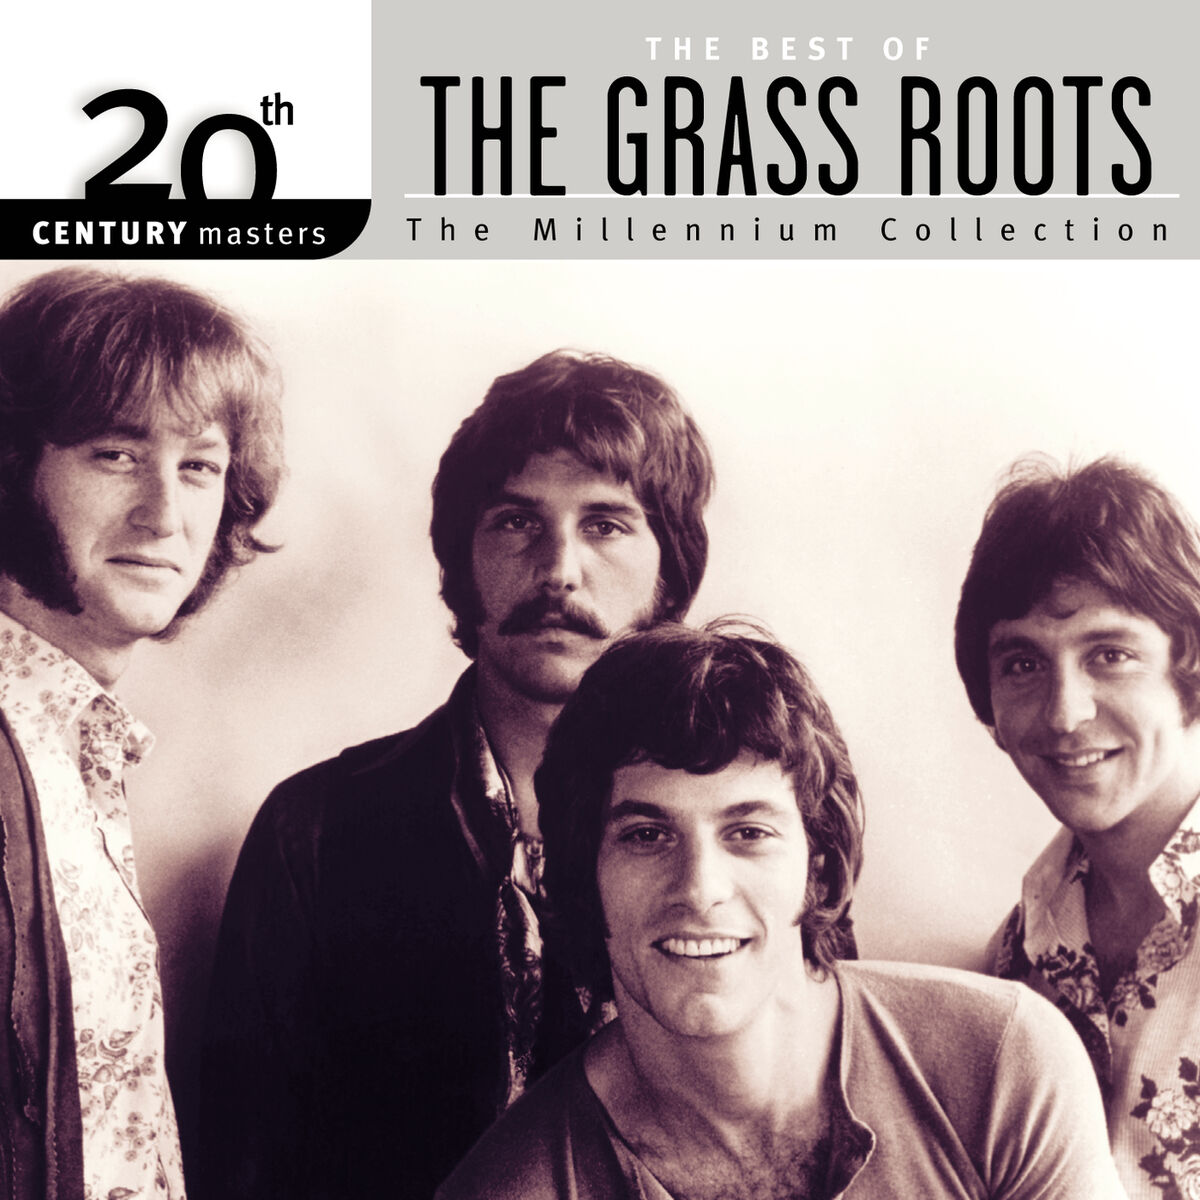 The Grass Roots: albums, songs, playlists | Listen on Deezer